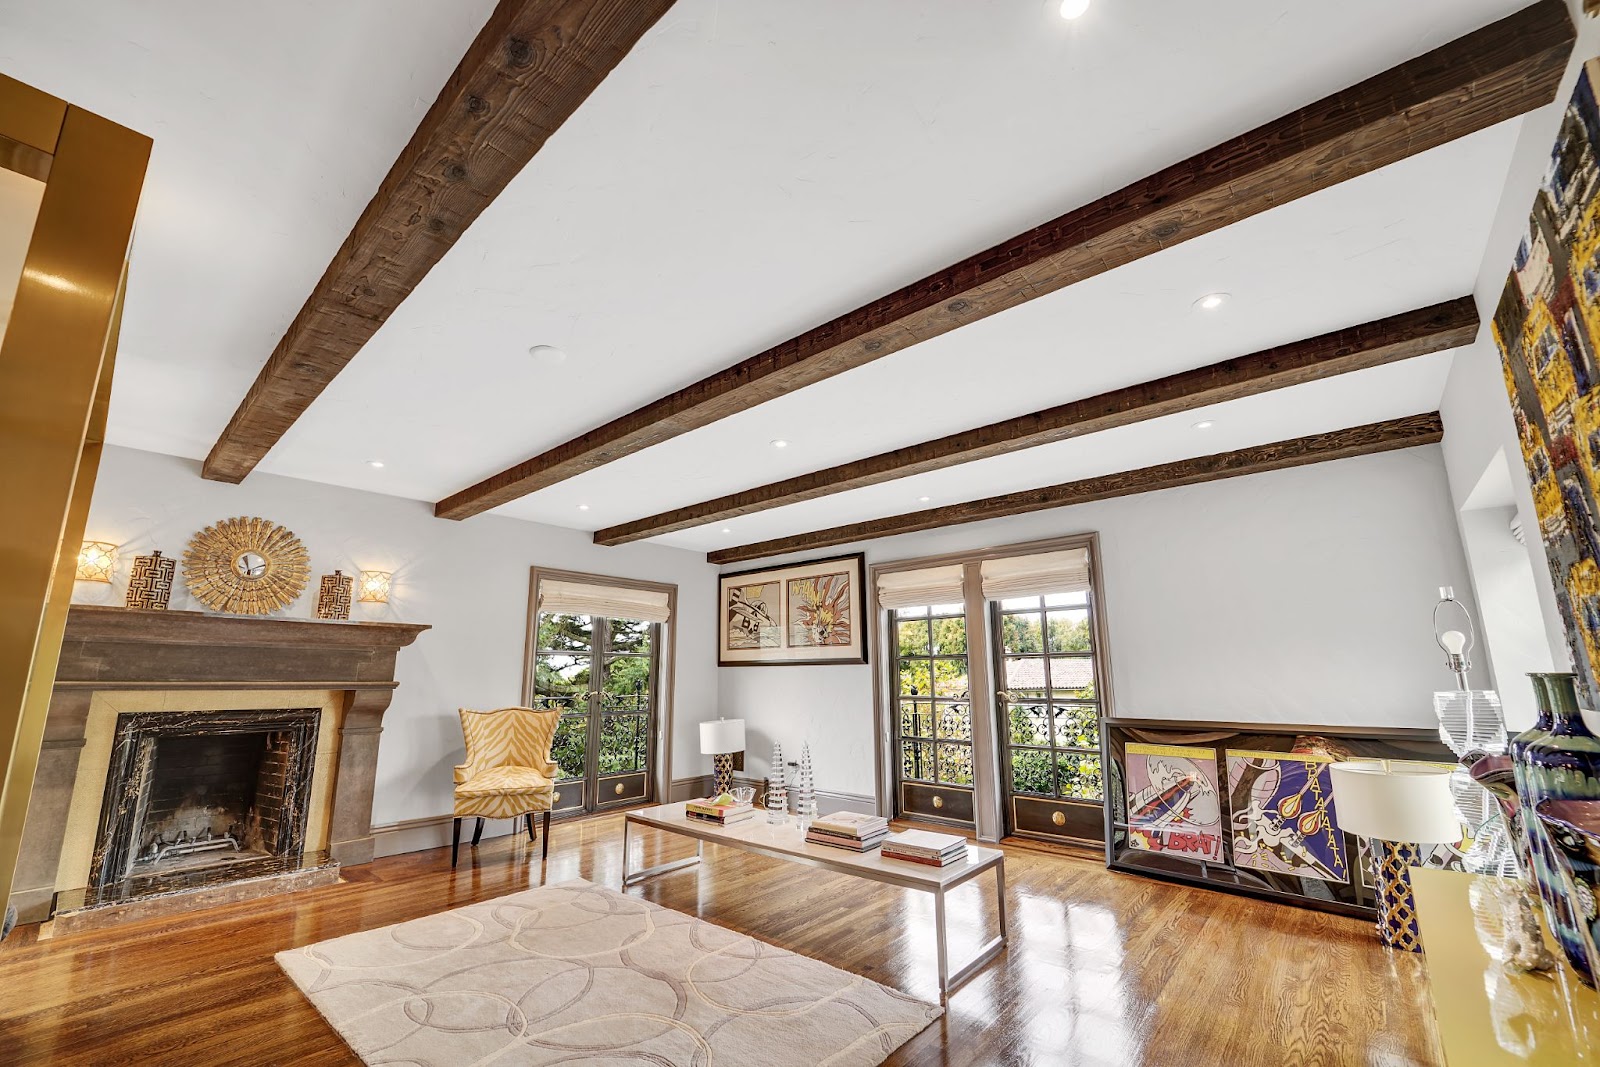 Rich Walnut Rough Hewn Faux Wood Beams adding elegance to a sophisticated great room ceiling